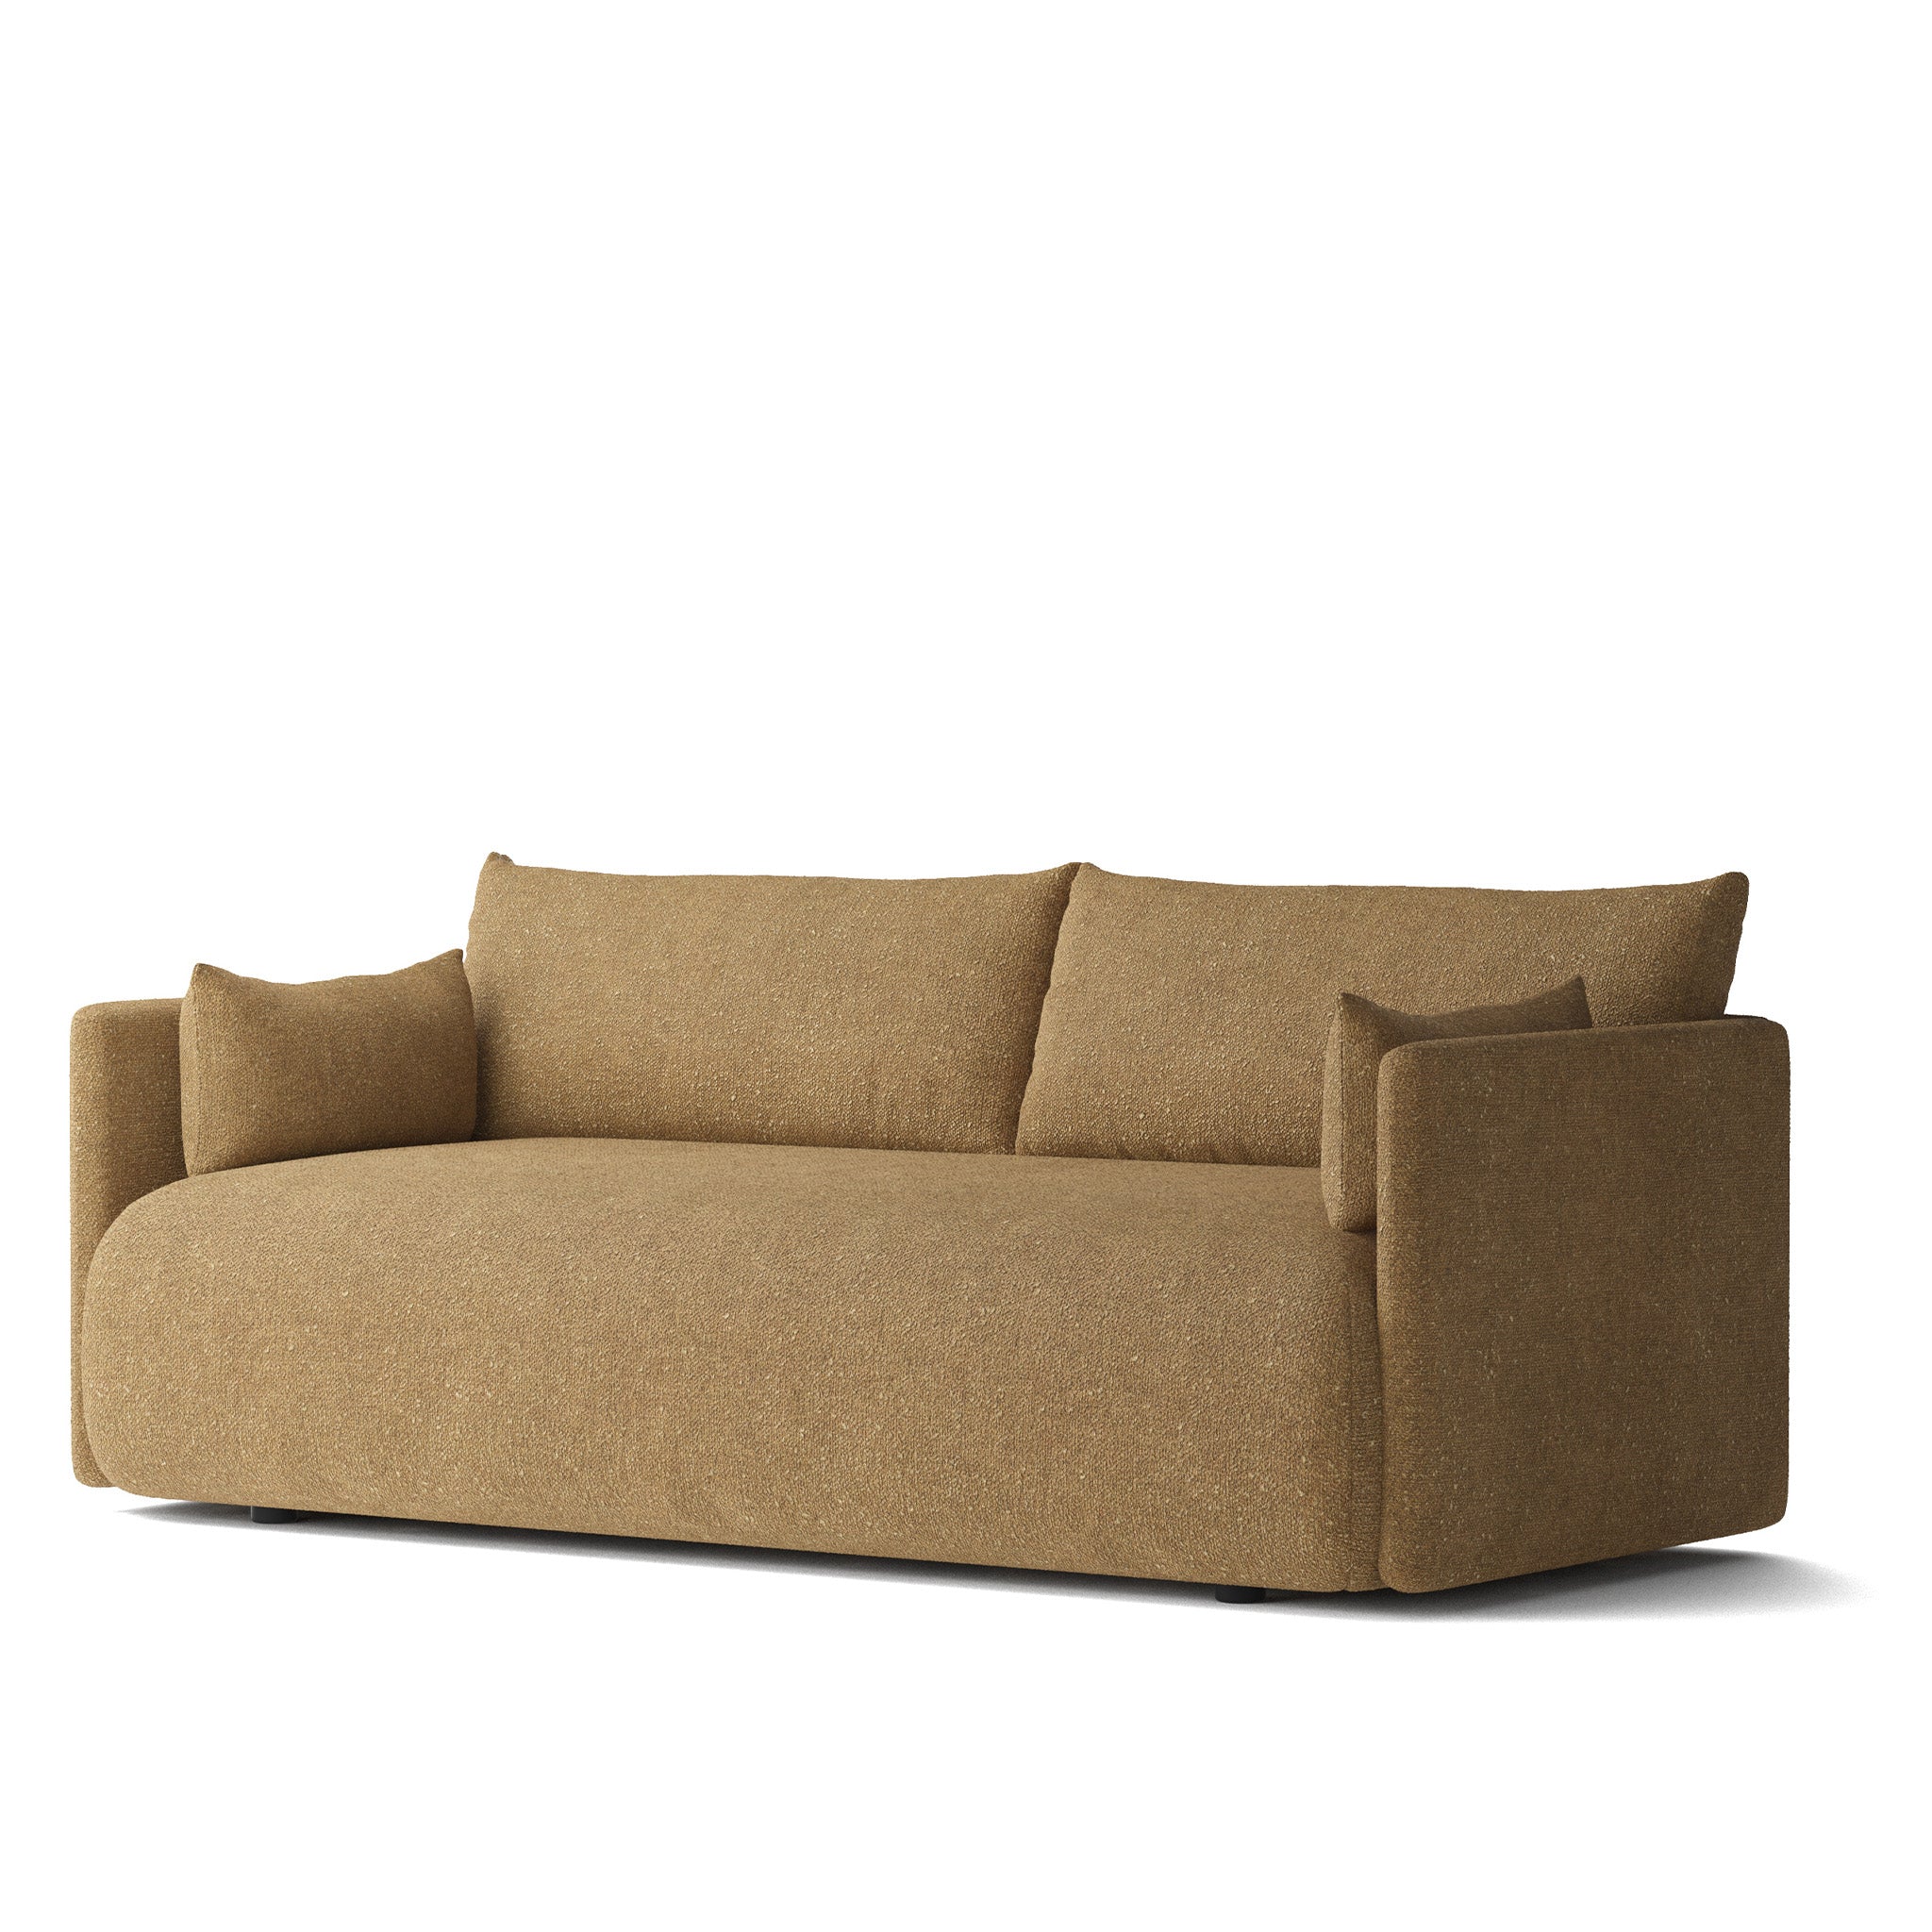 Offset 2-Seater Sofa by Norm Architects